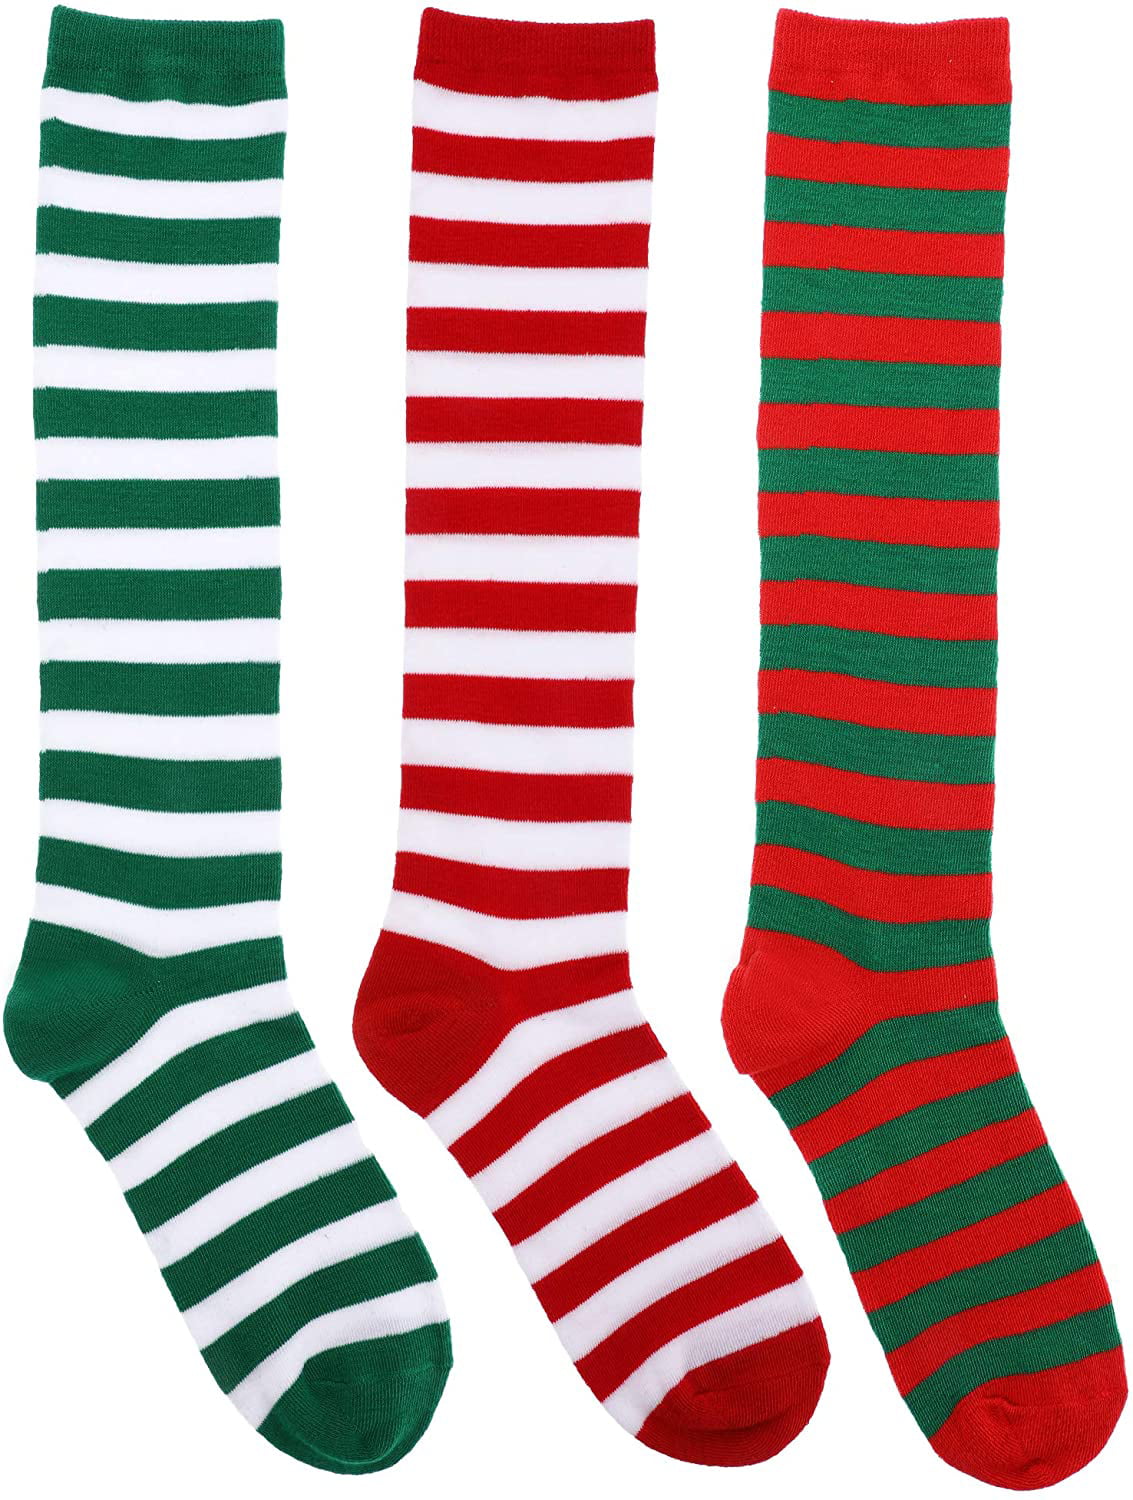 3 Pairs Long Striped Socks Knee High Stocking for Halloween Cosplay Party Costumes